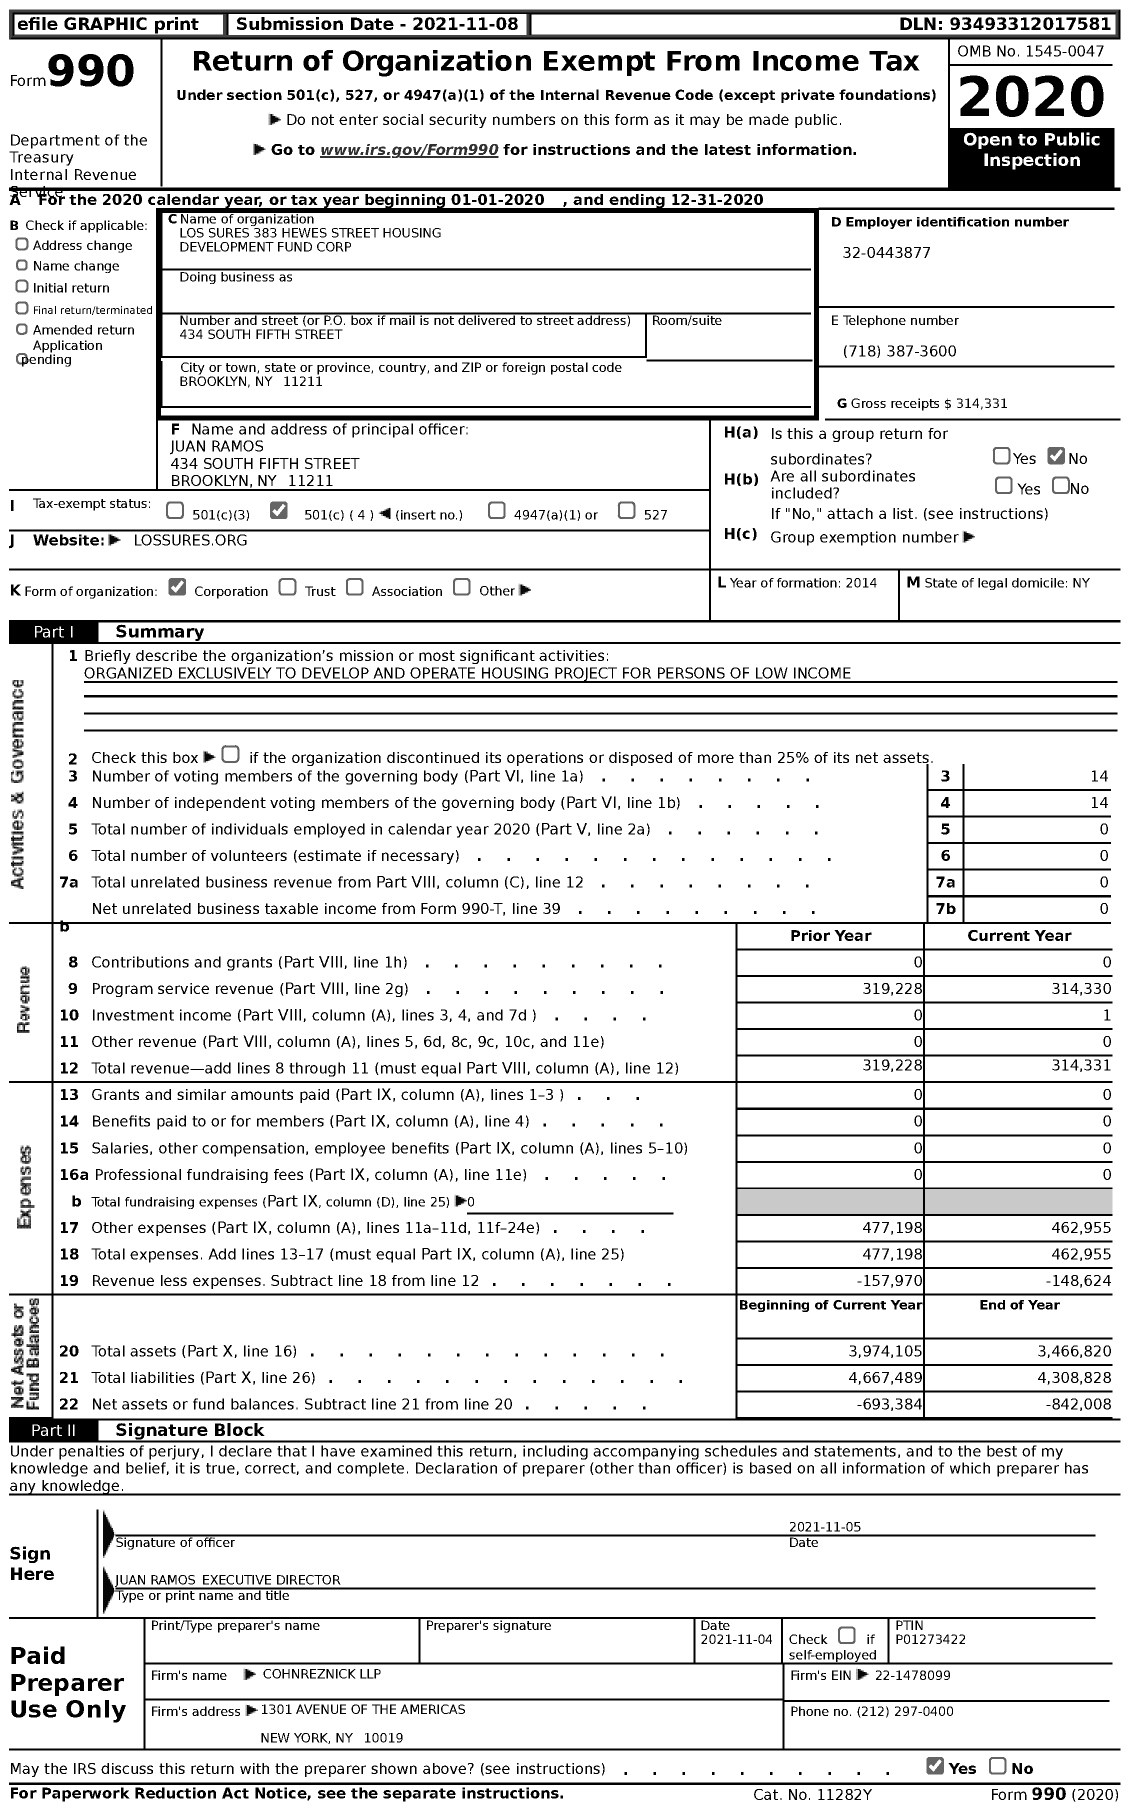 Image of first page of 2020 Form 990 for Los Sures 383 Hewes Street Housing Development Fund Corporation